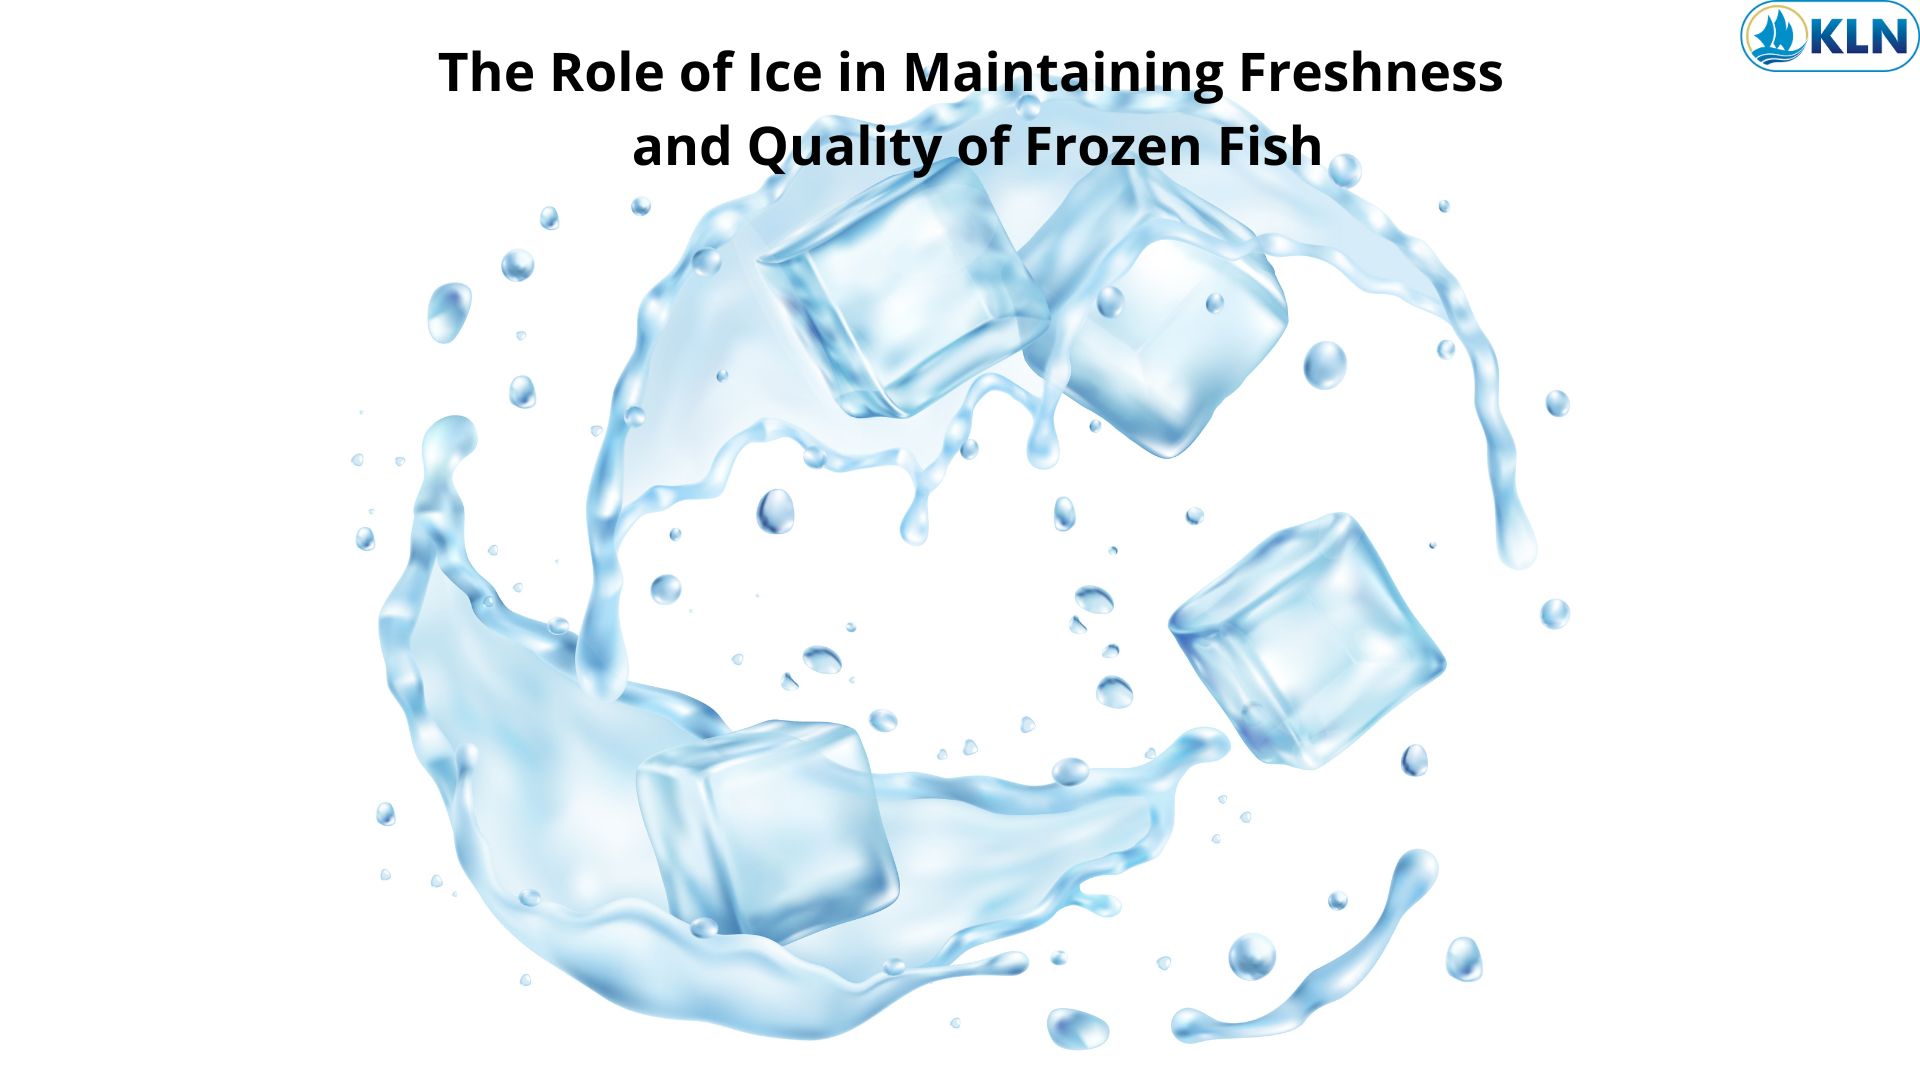 The Role of Ice in Maintaining Freshness and Quality of Frozen Fish